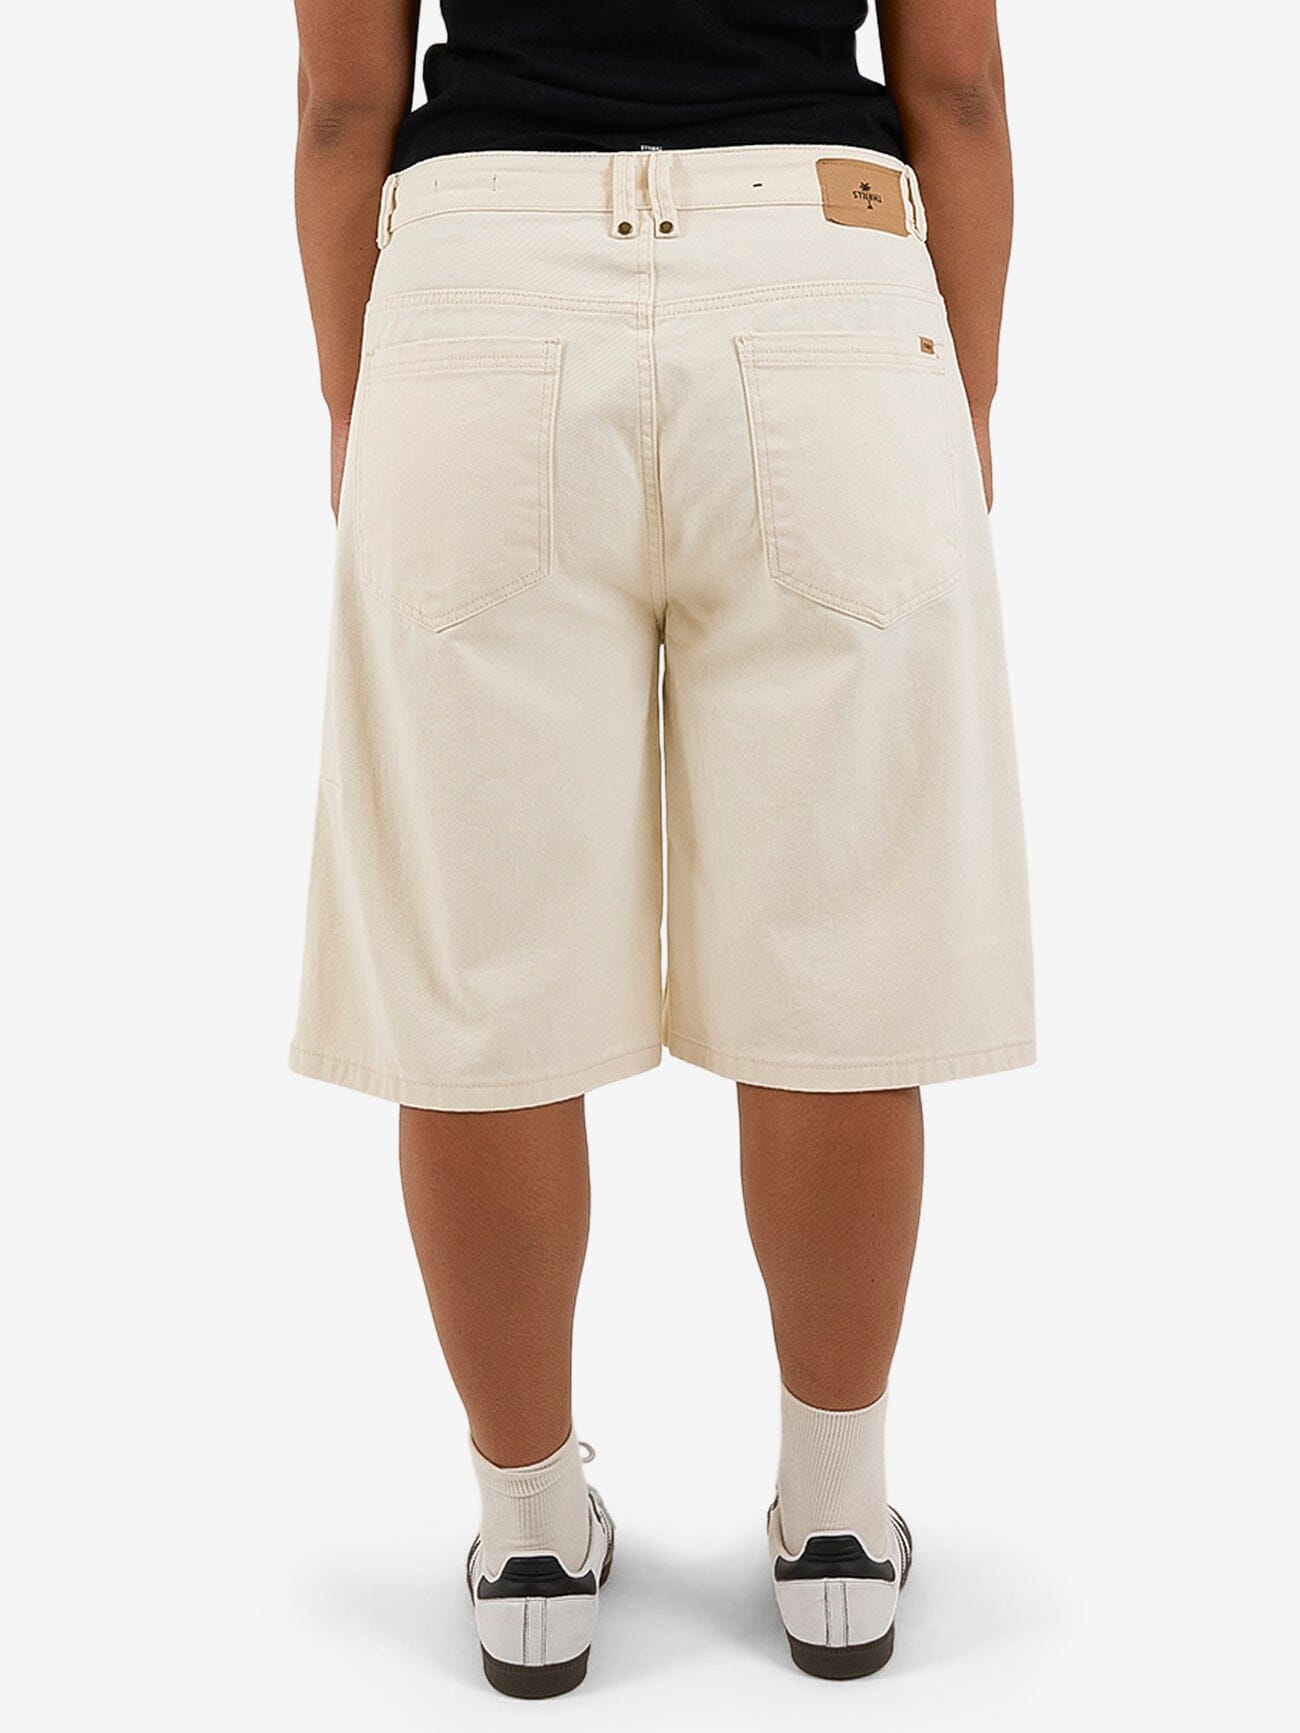 Syd Baggy Short - Heritage White